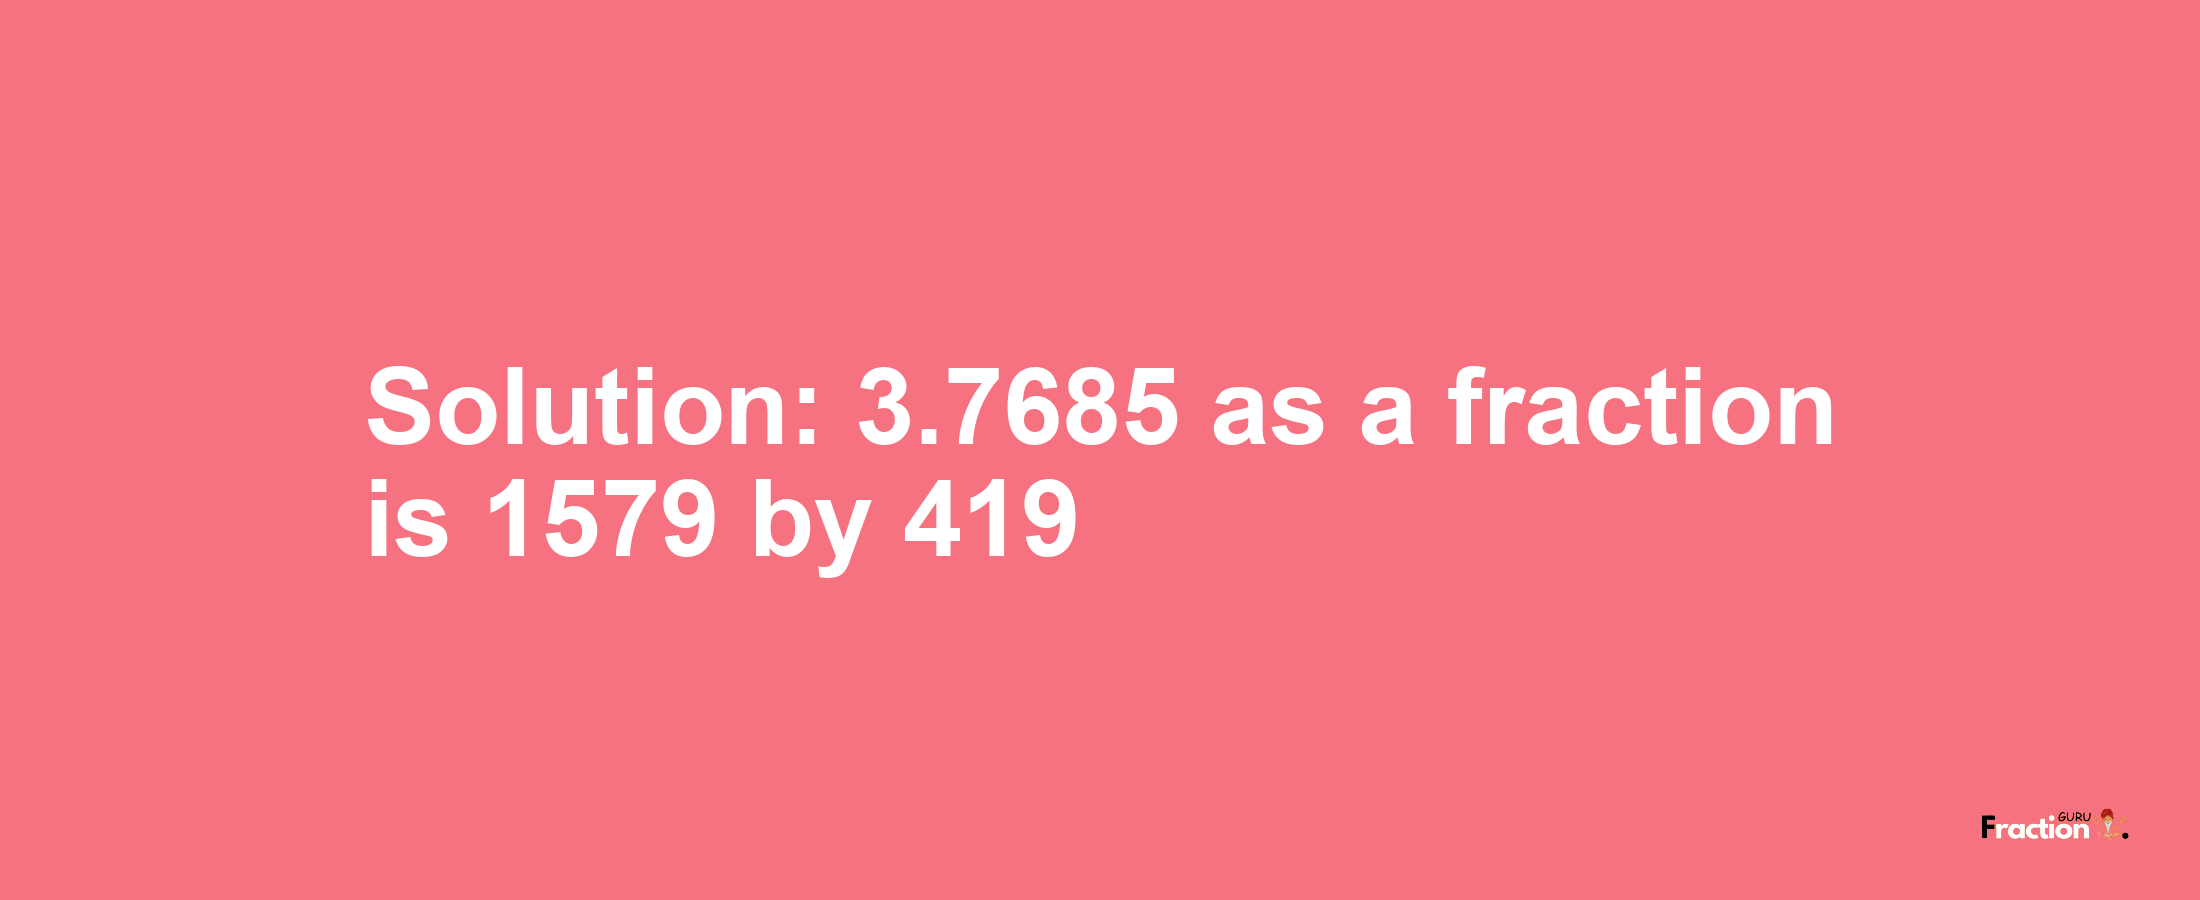 Solution:3.7685 as a fraction is 1579/419